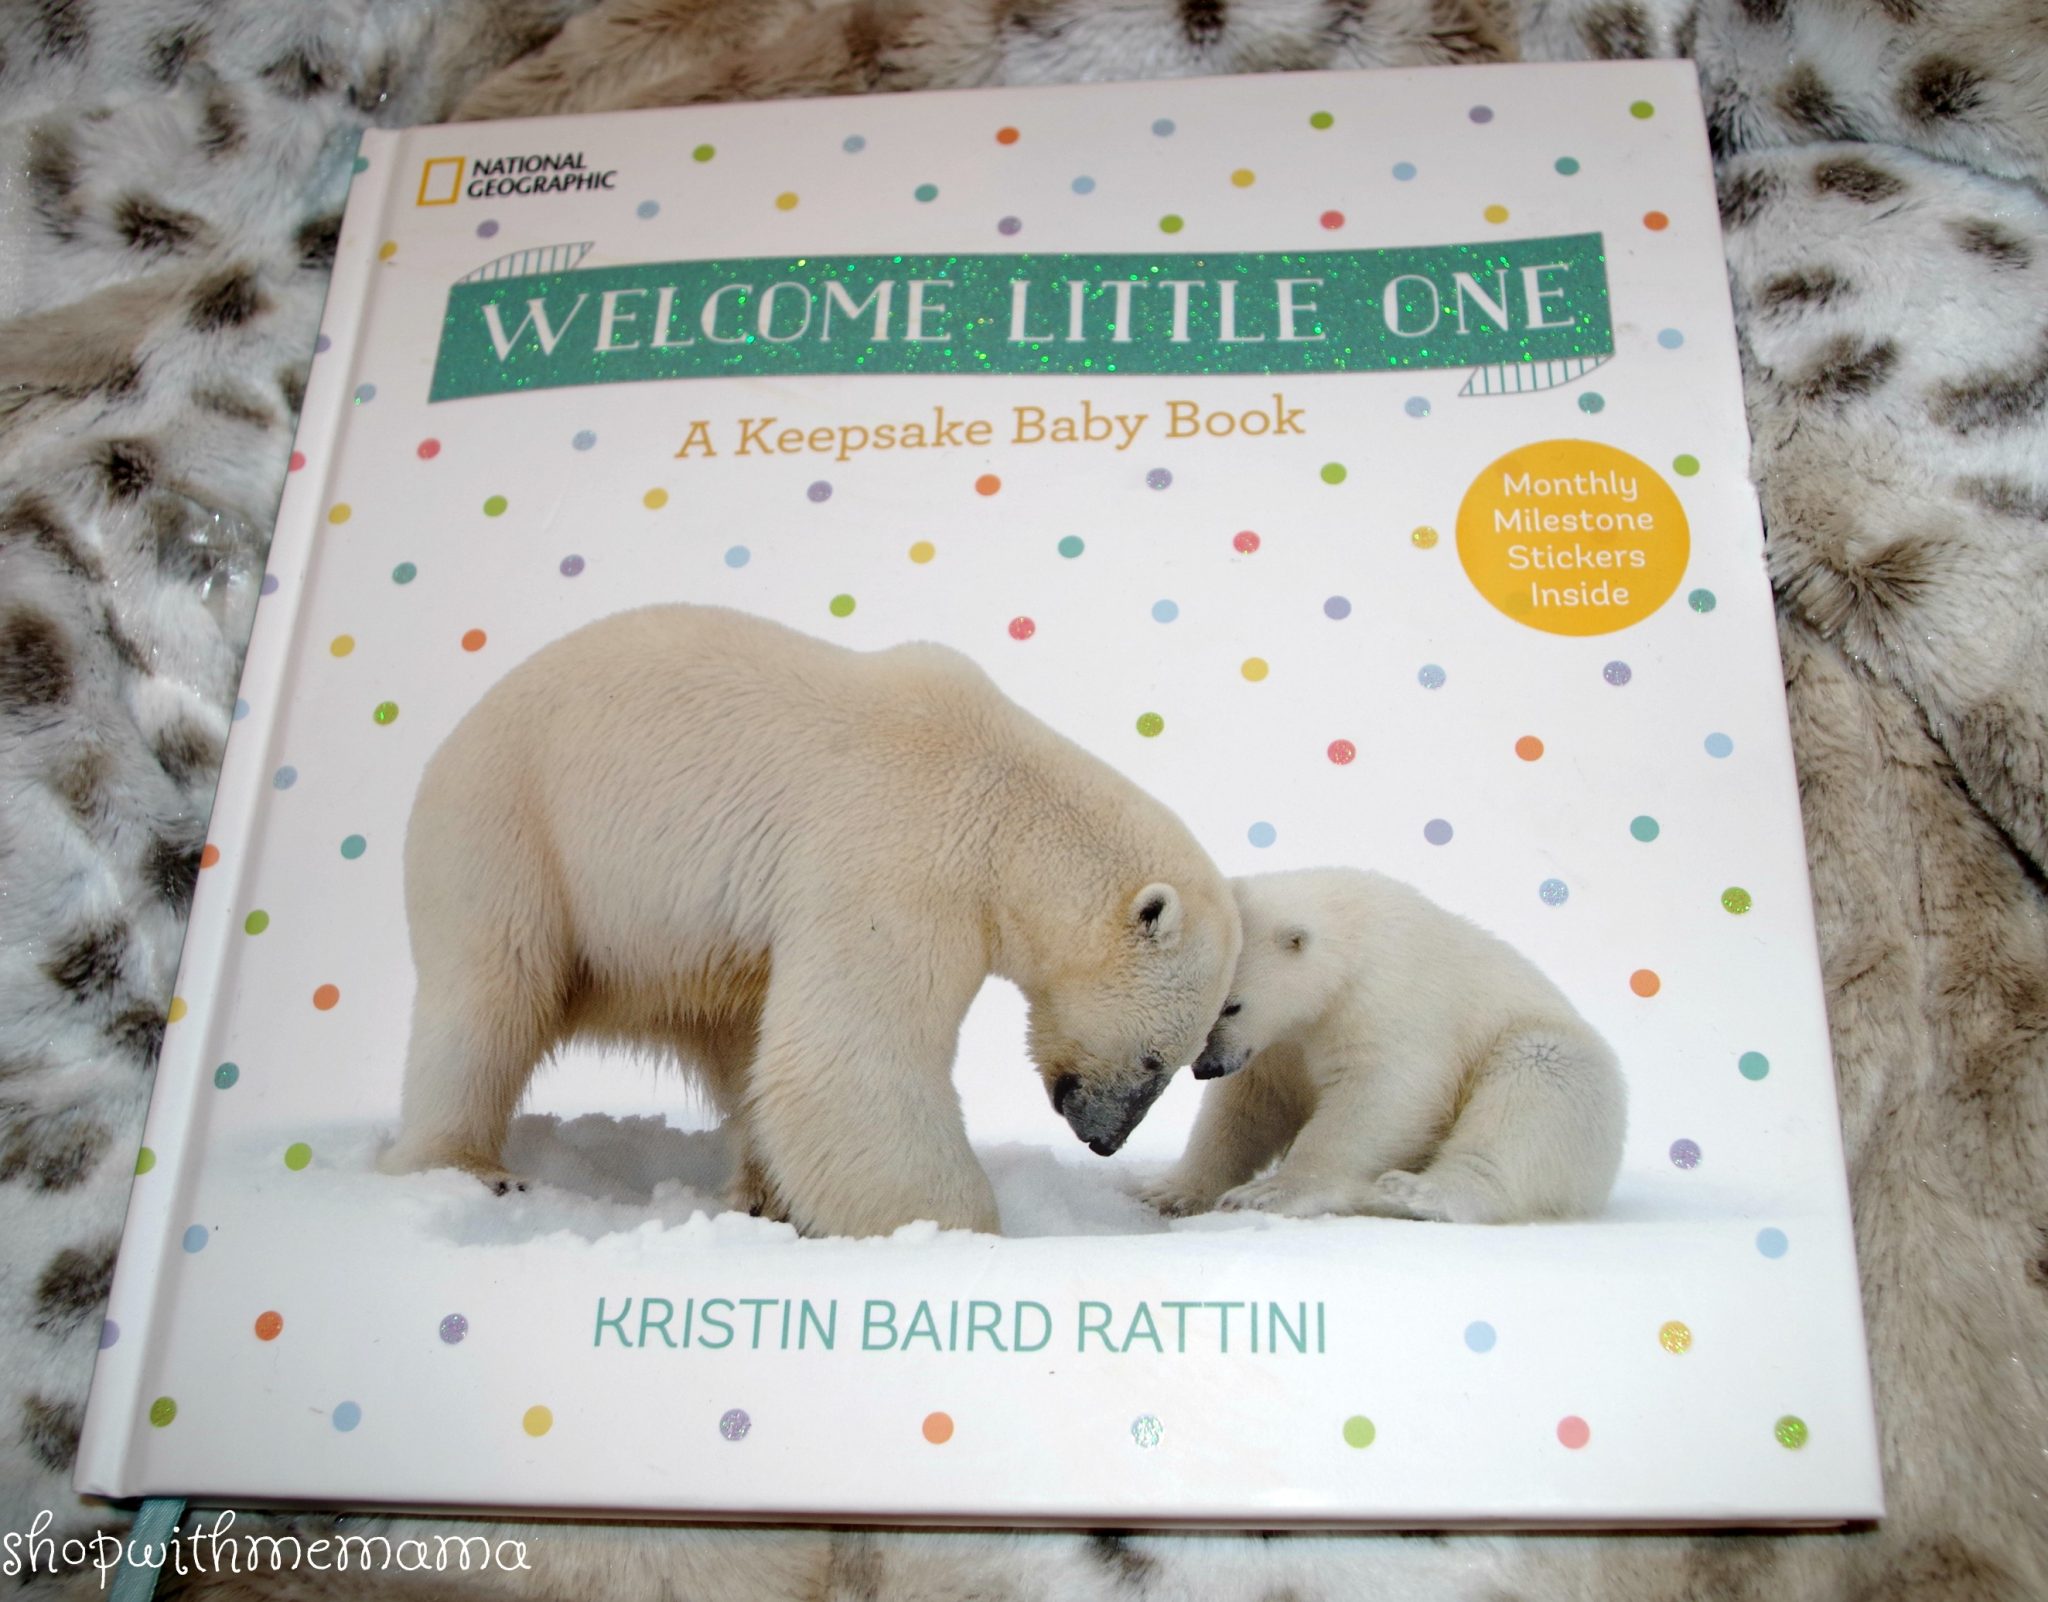 Welcome Little One: A Keepsake Baby Book by National Geographic 